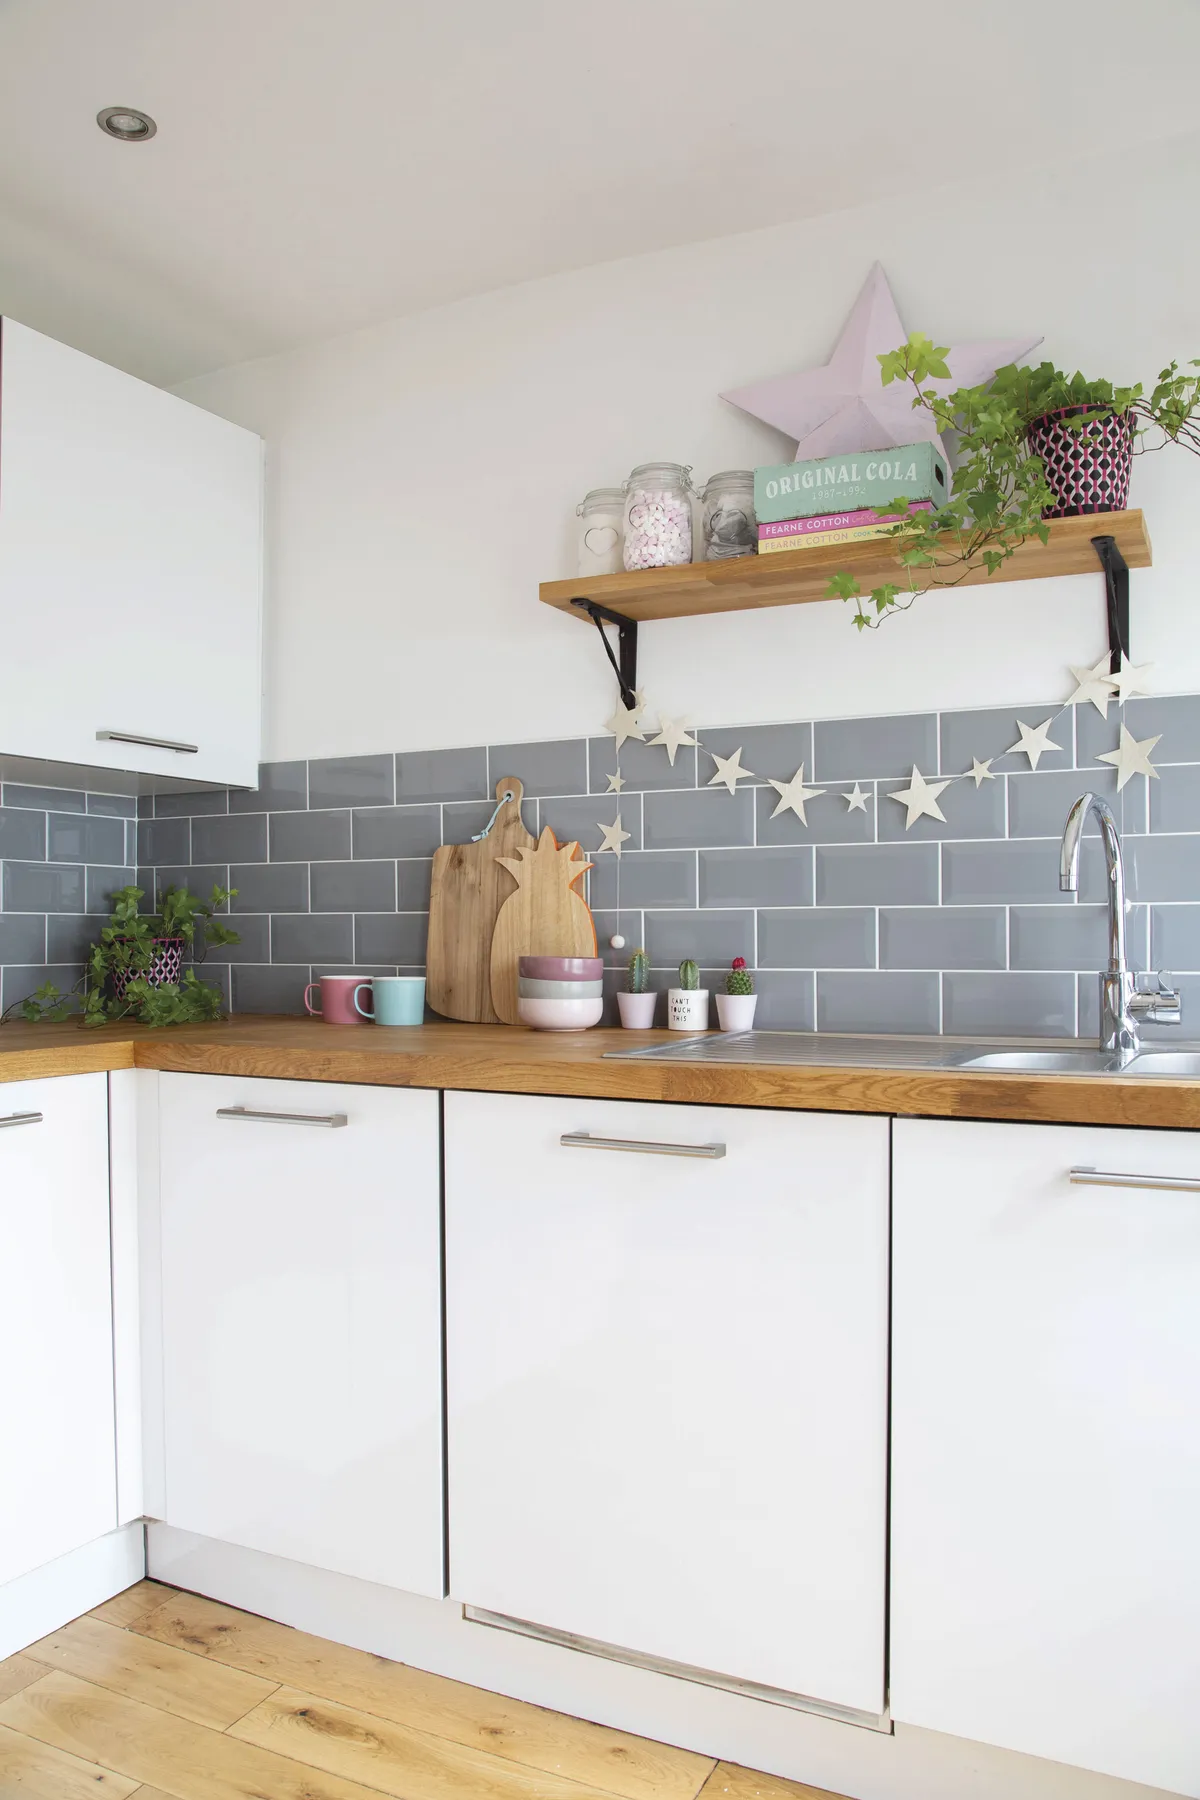 The original, behind-the-times kitchen was hastily removed the day the couple moved in to allow room for their appliances. In its place, they fitted simple, unfussy units and low-cost tiles to, once again, allow artwork to take centre stage